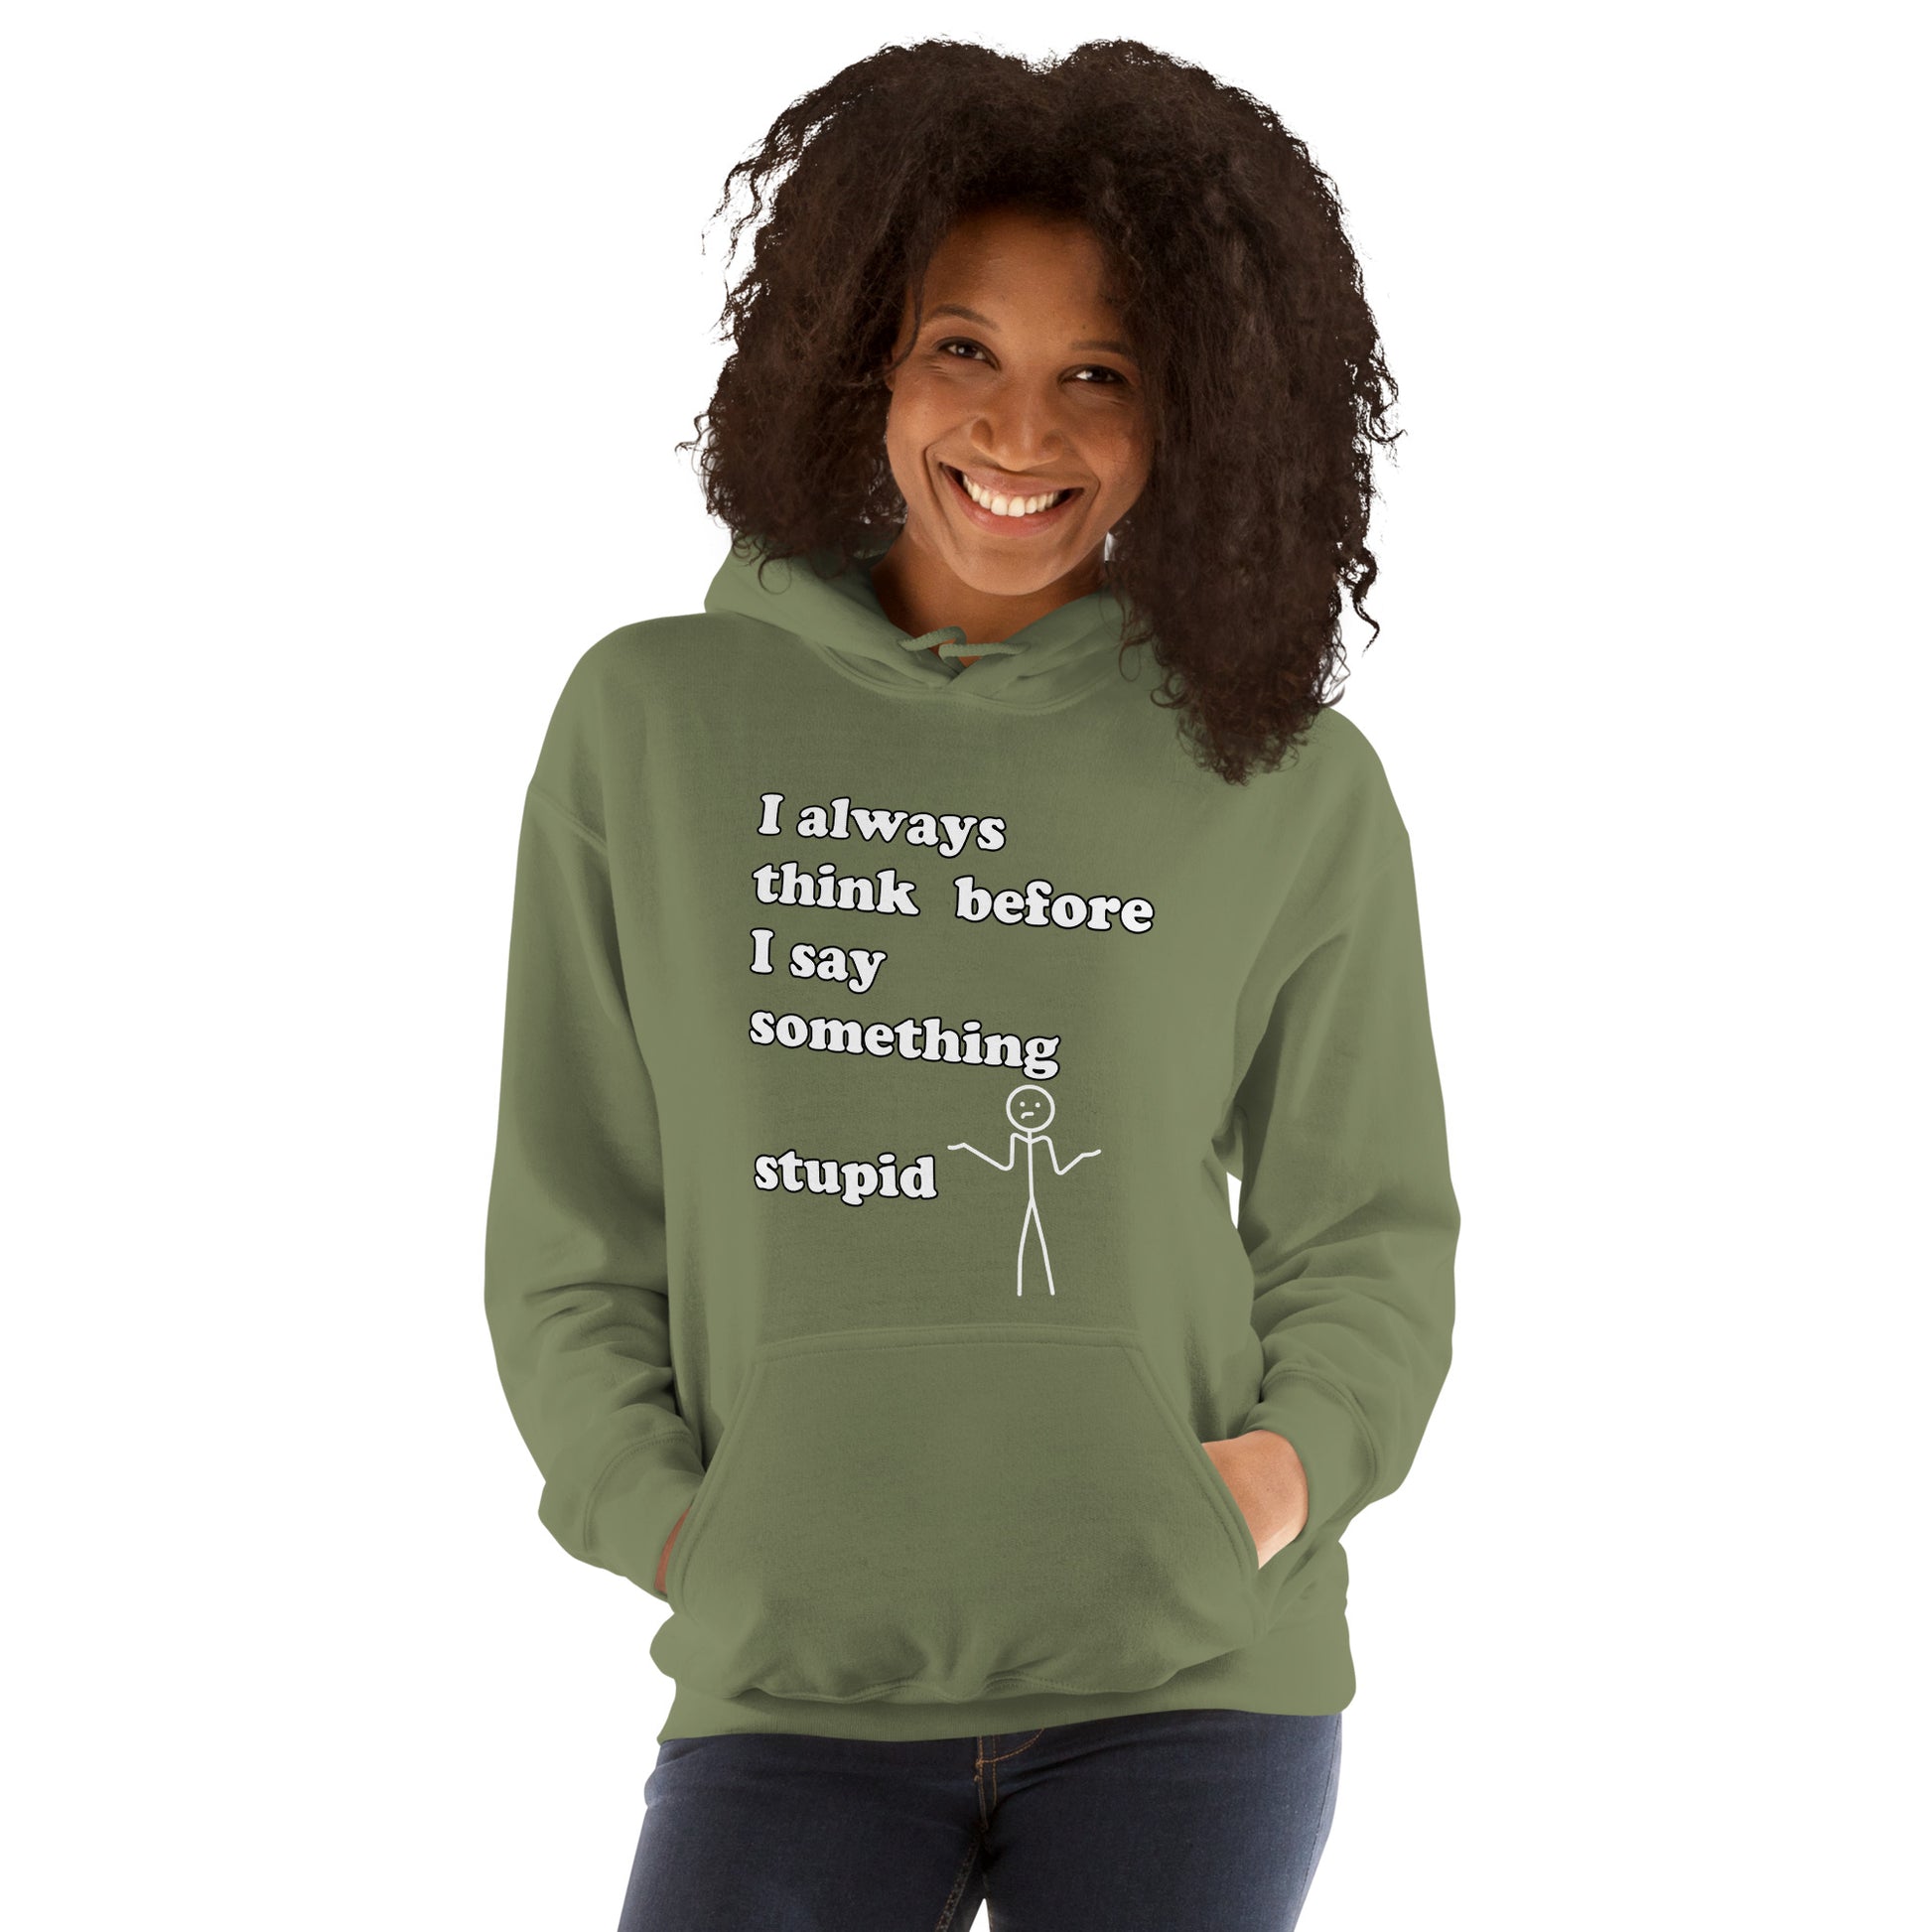 Woman with military green hoodie with text "I always think before I say something stupid"